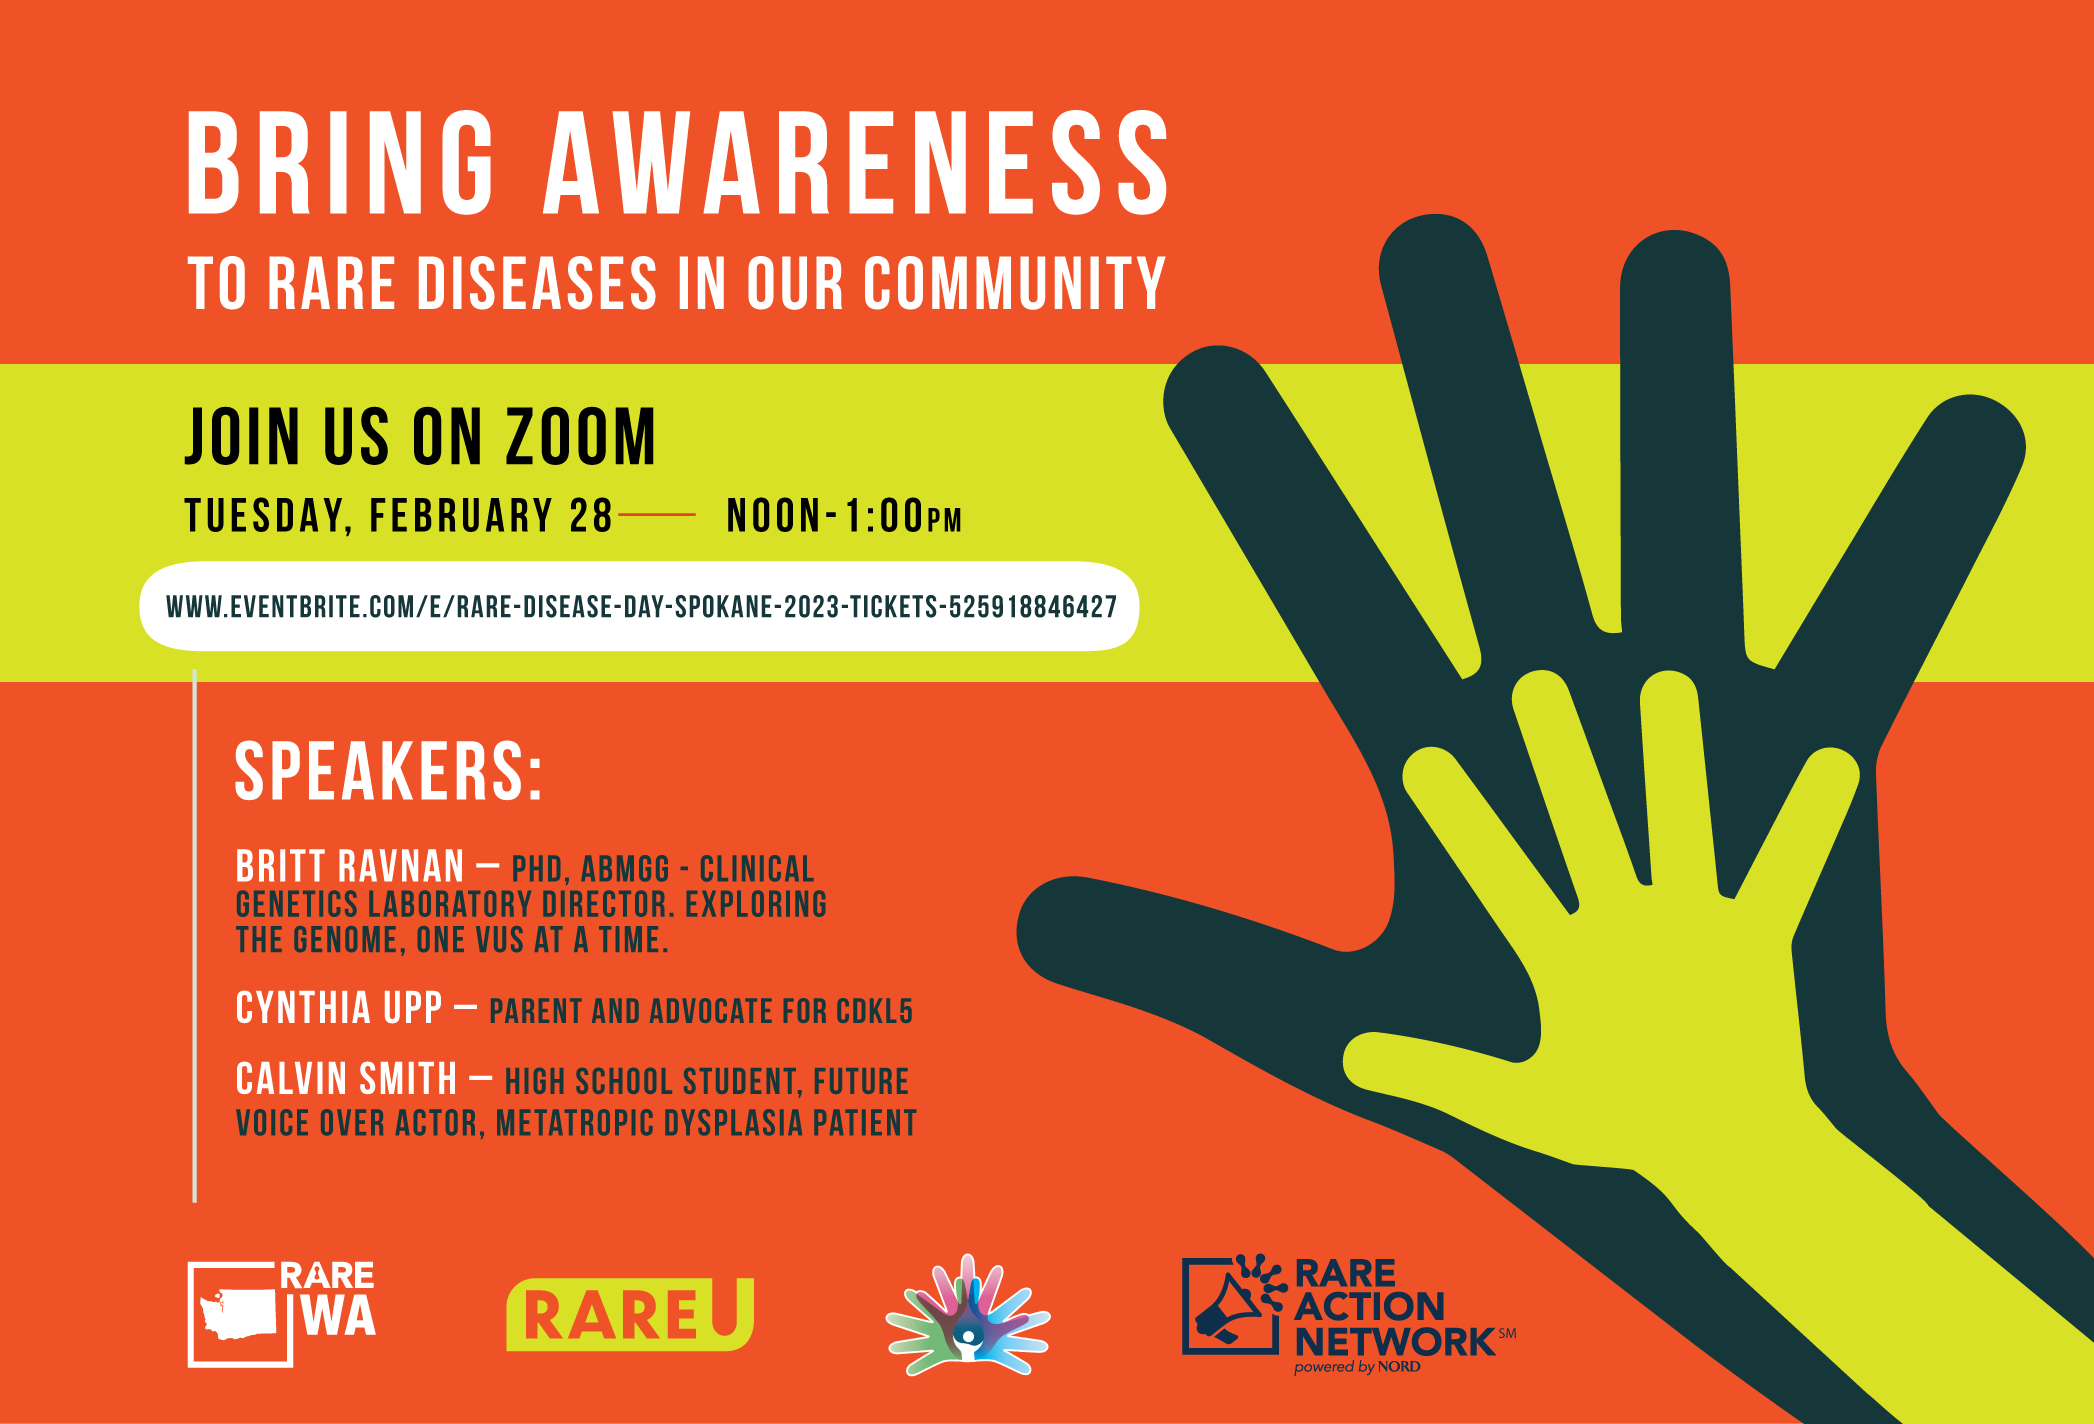 Bring Awareness to Rare Diseases in Our Community